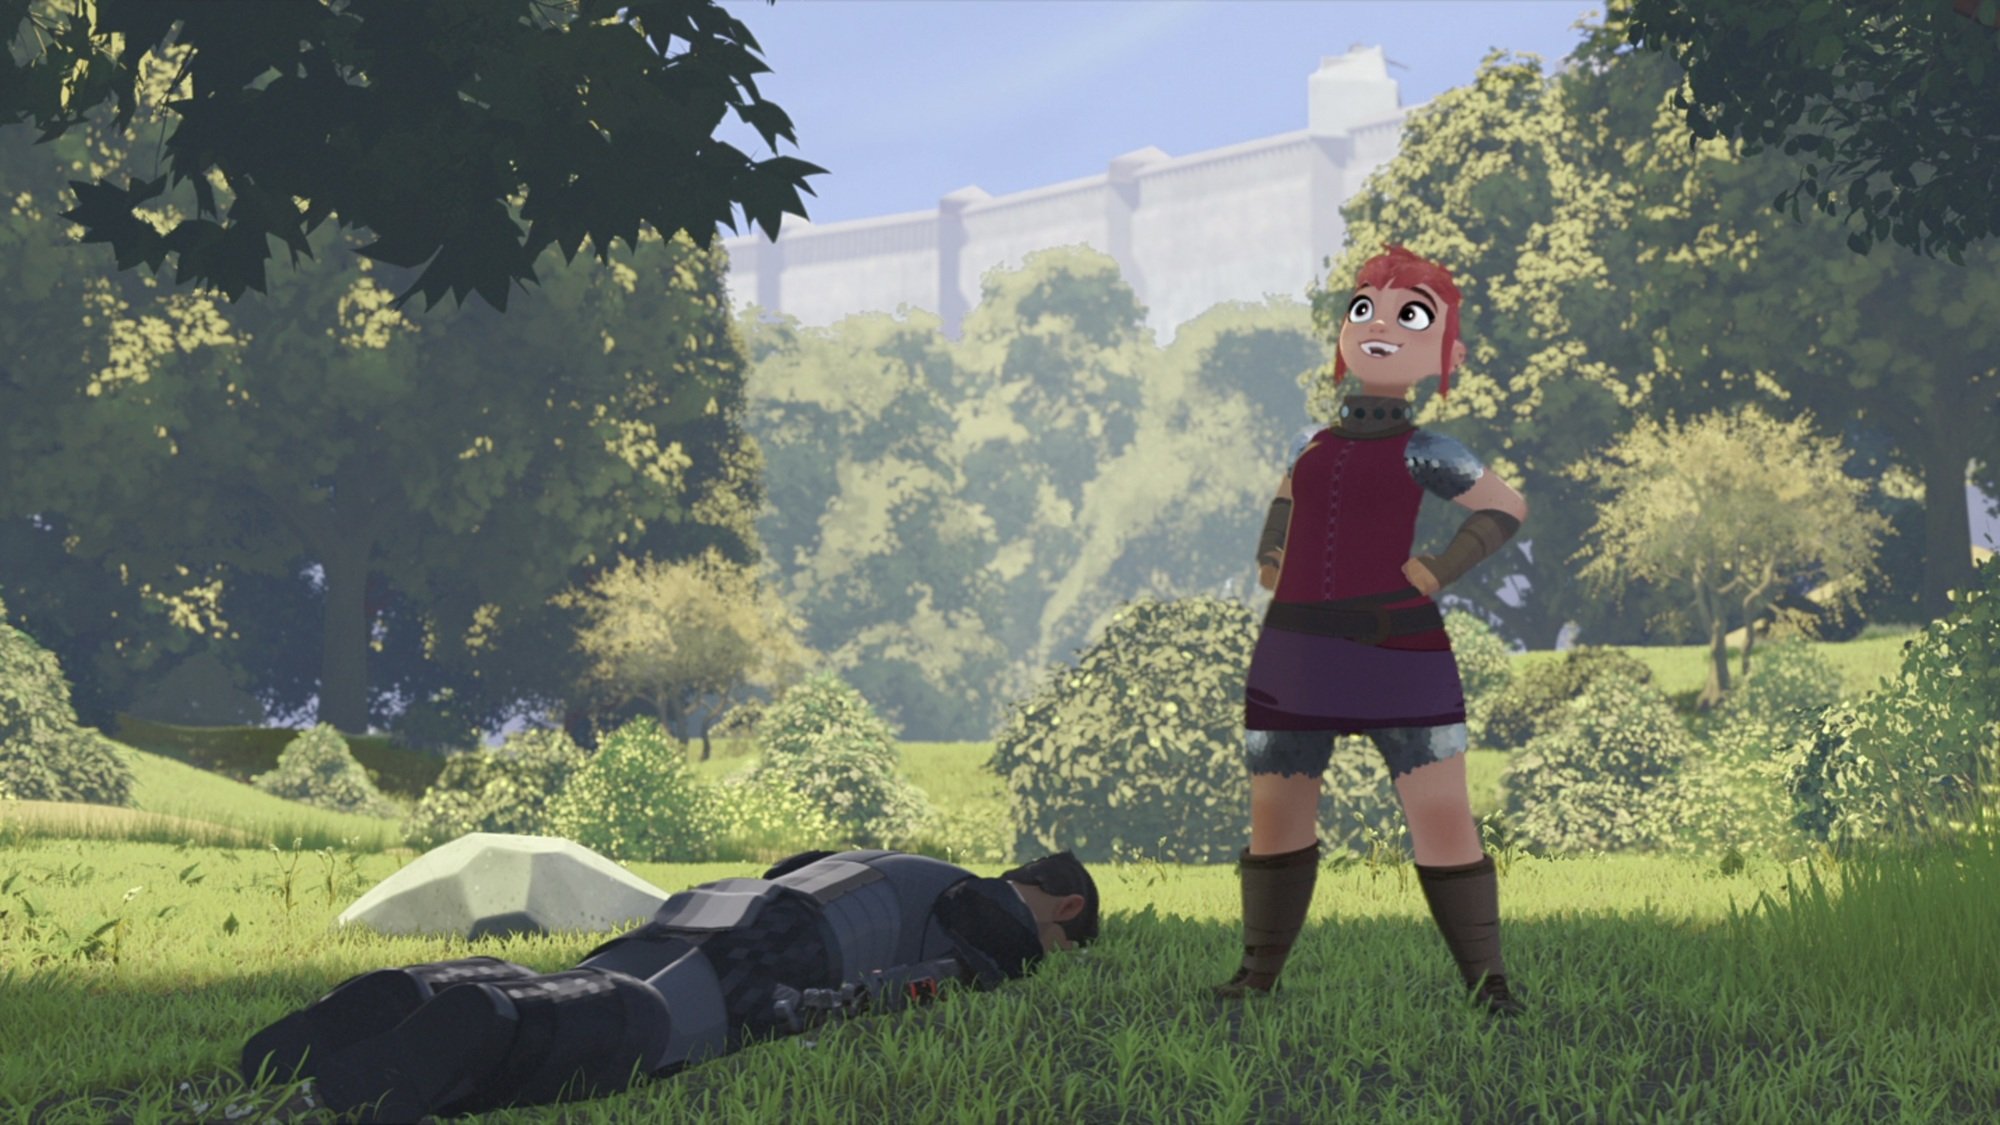 A young girl with pink hair stands with her hands on her hips in triumph, while a knight in black armor lies facedown in the grass next to her.